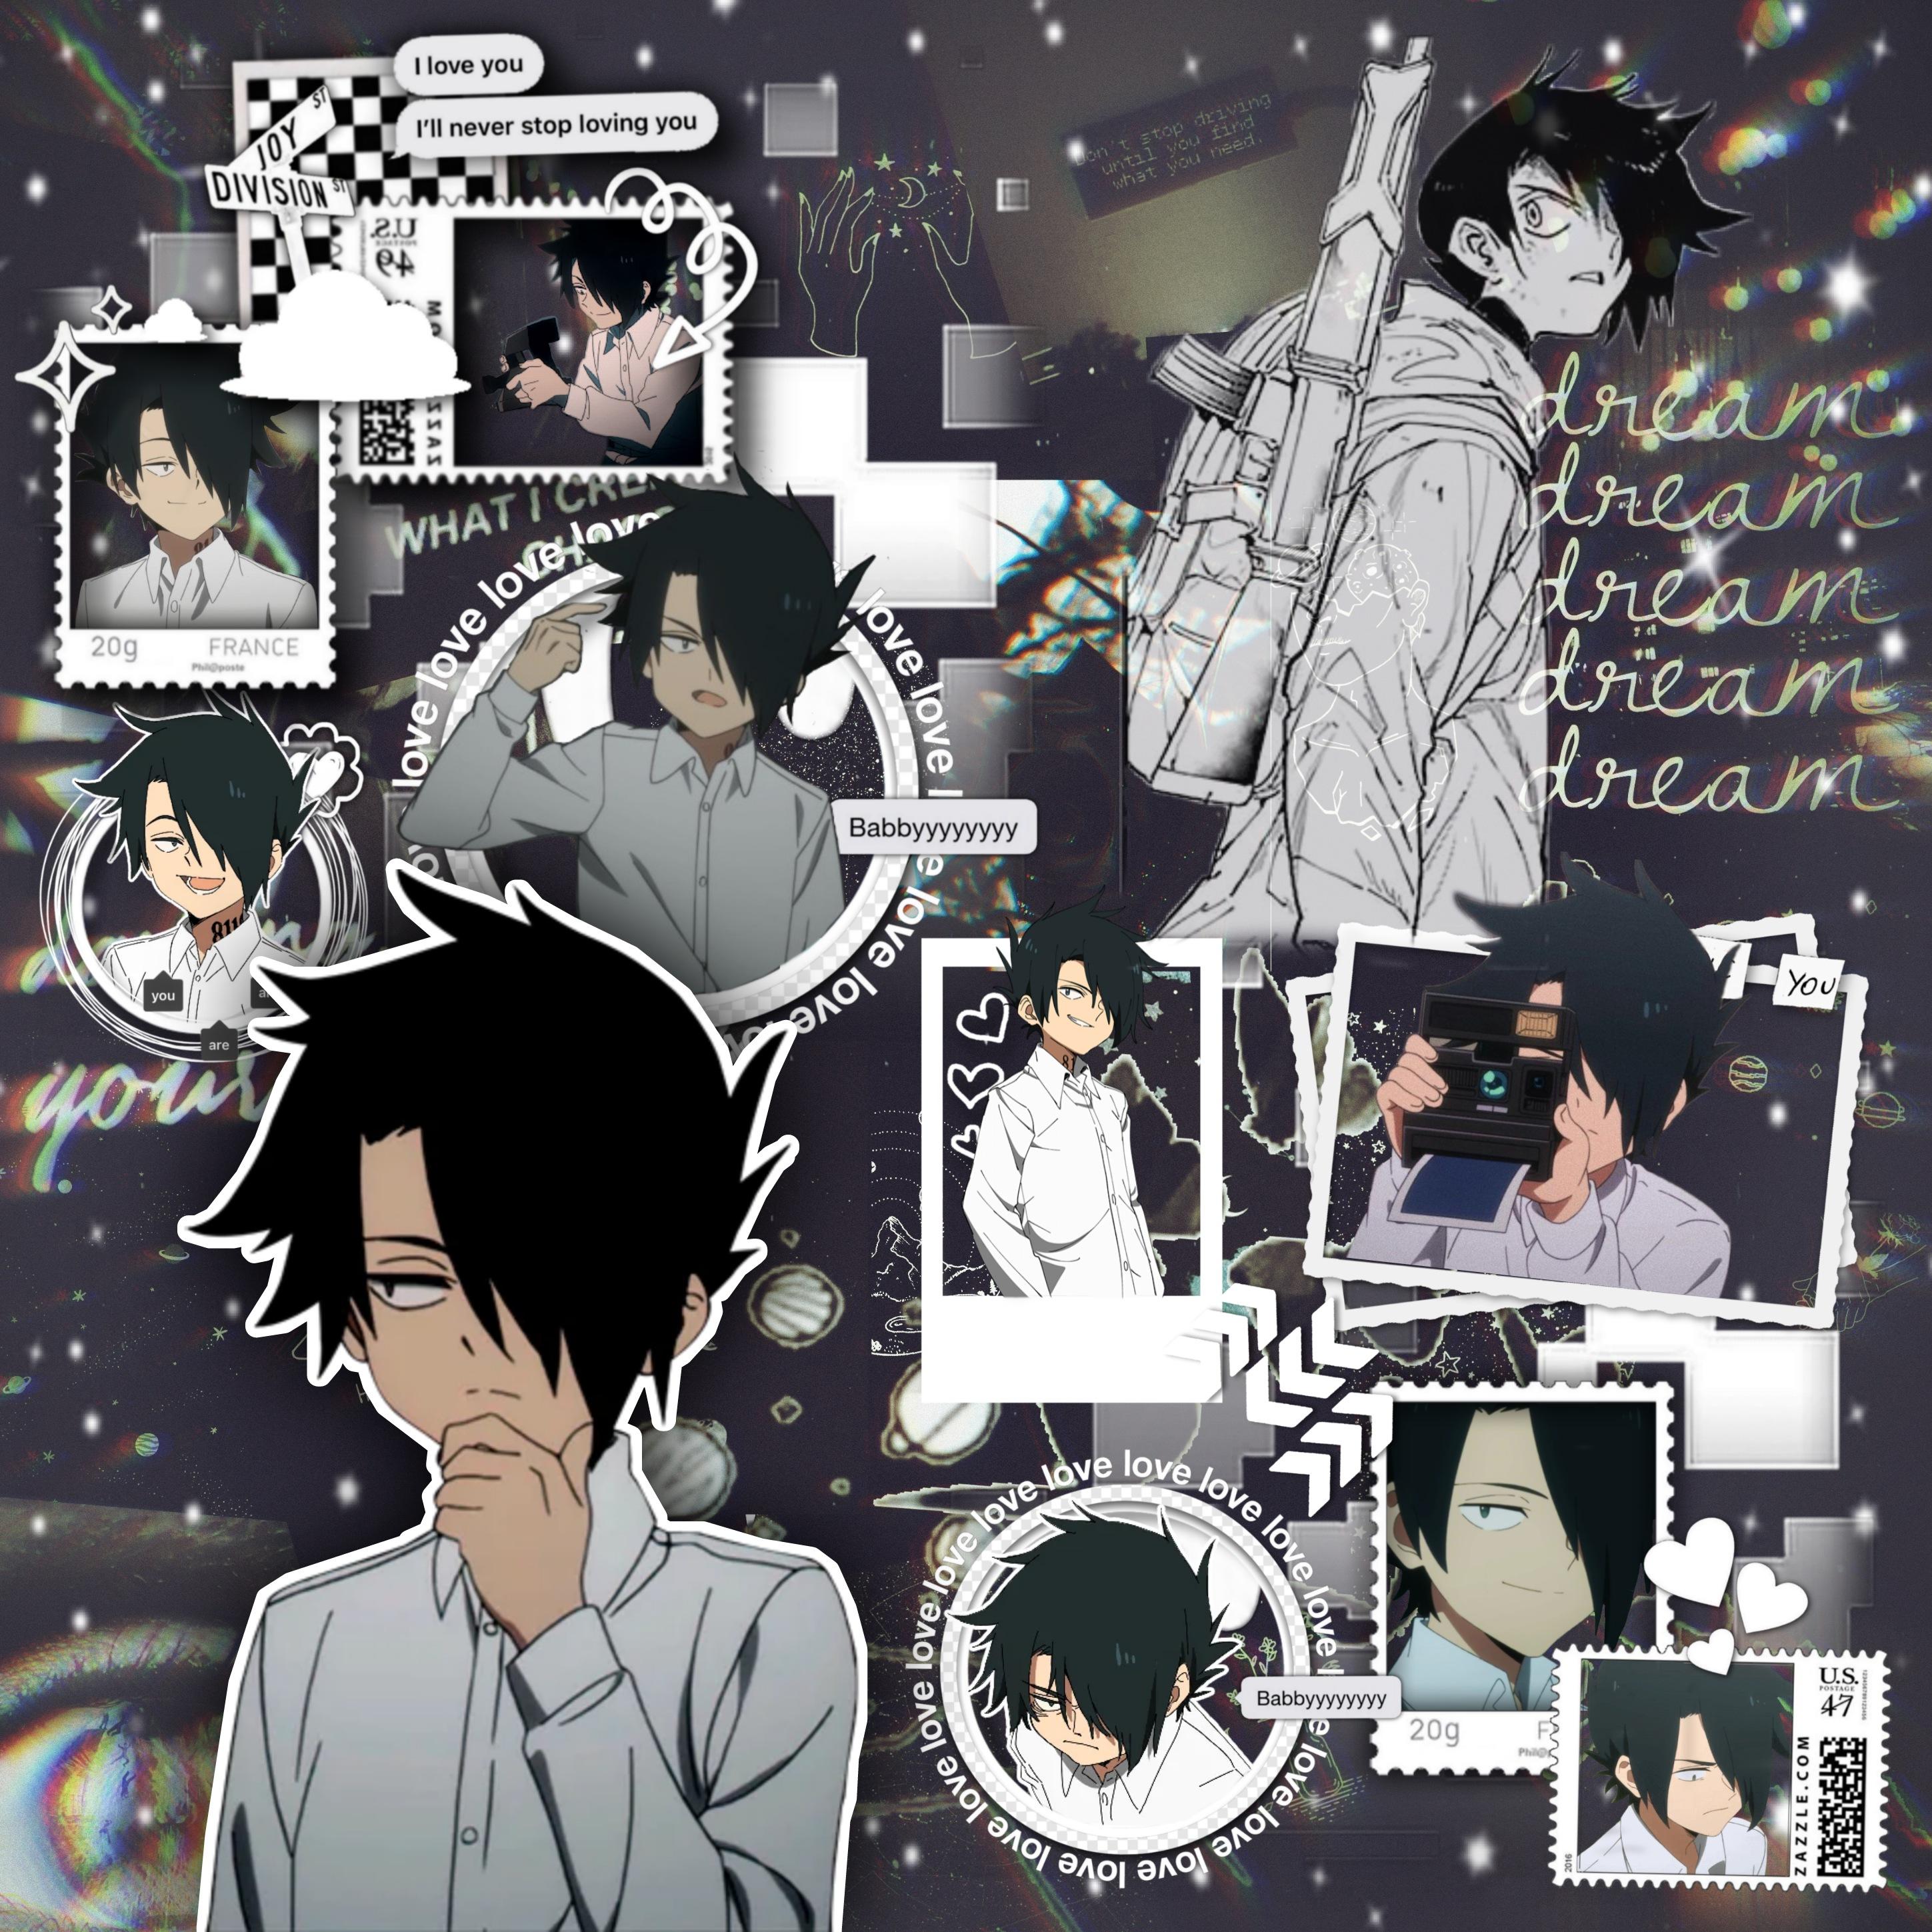 Download Anime Collage On Tumblr - Anime Collage PNG Image with No  Background - PNGkey.com